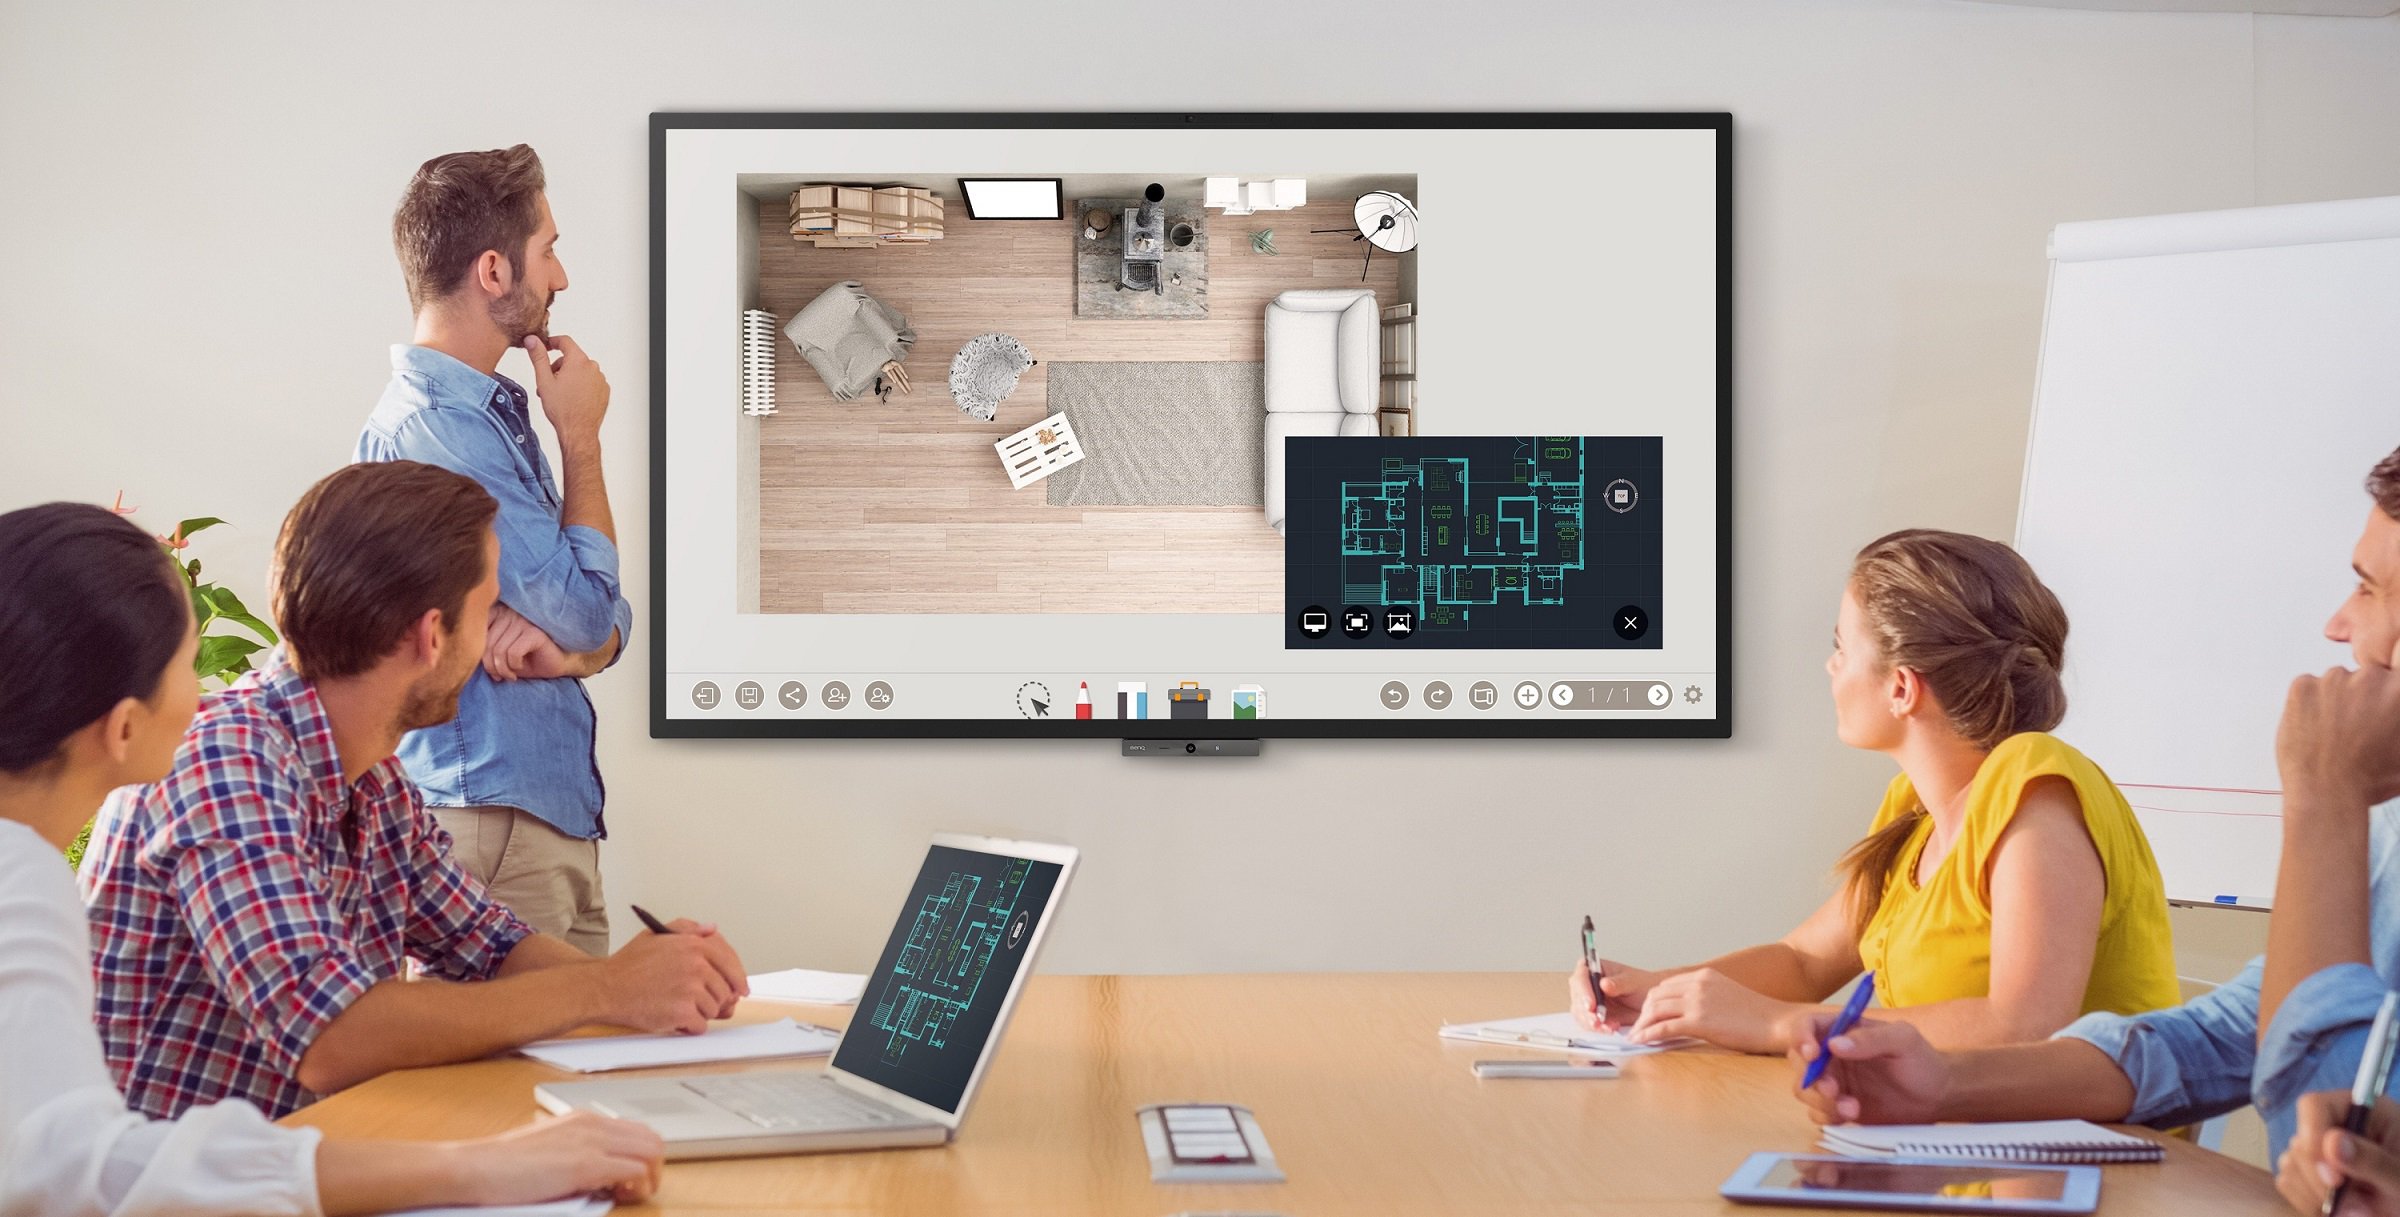 BenQ DuoBoard interactive displays, now qualified to be listed in the AWS Partner Device Catalog, work seamlessly with Amazon Web Services to deliver successful IoT solutions